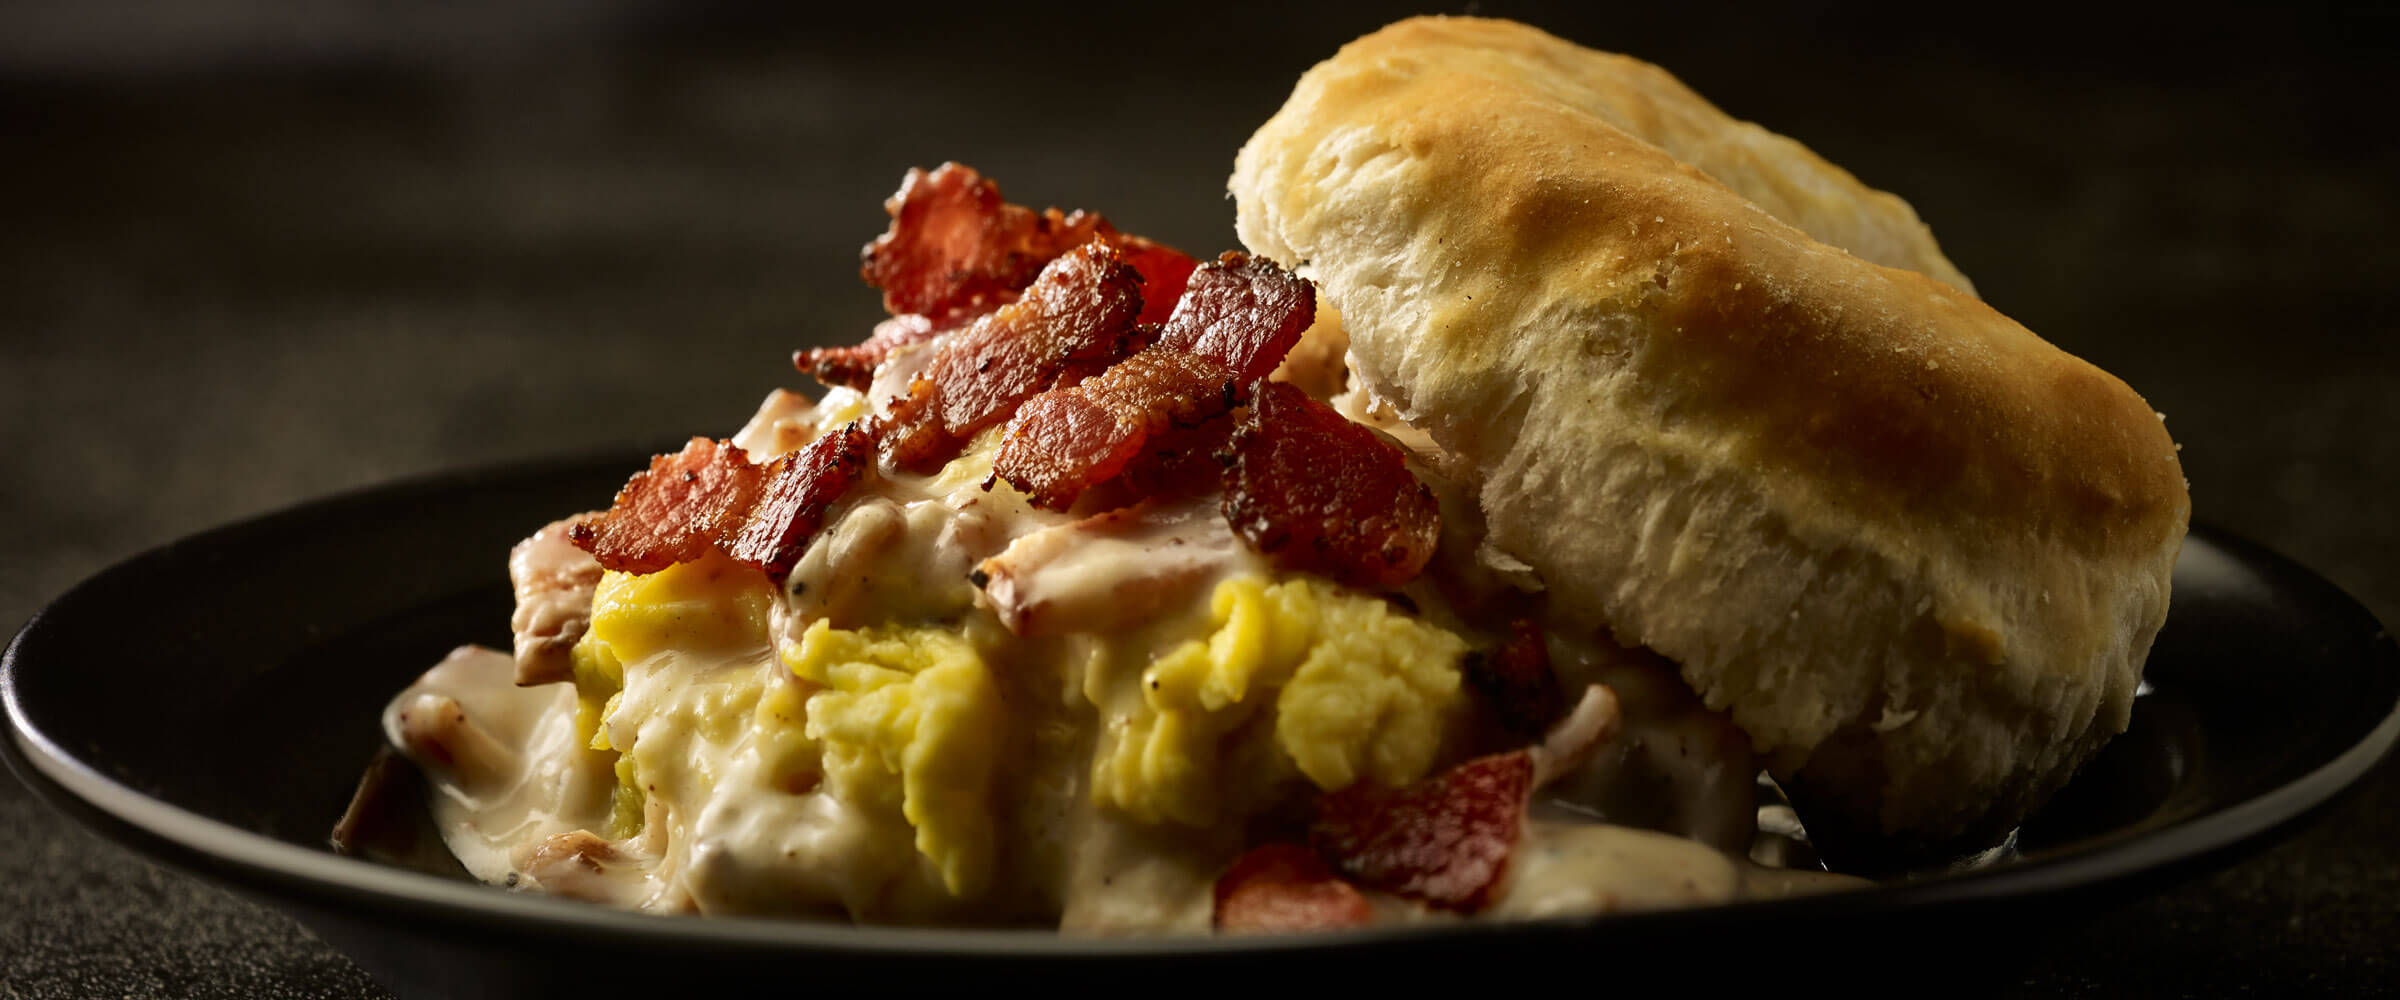 Biscuits and gravy topped with bacon on black plate